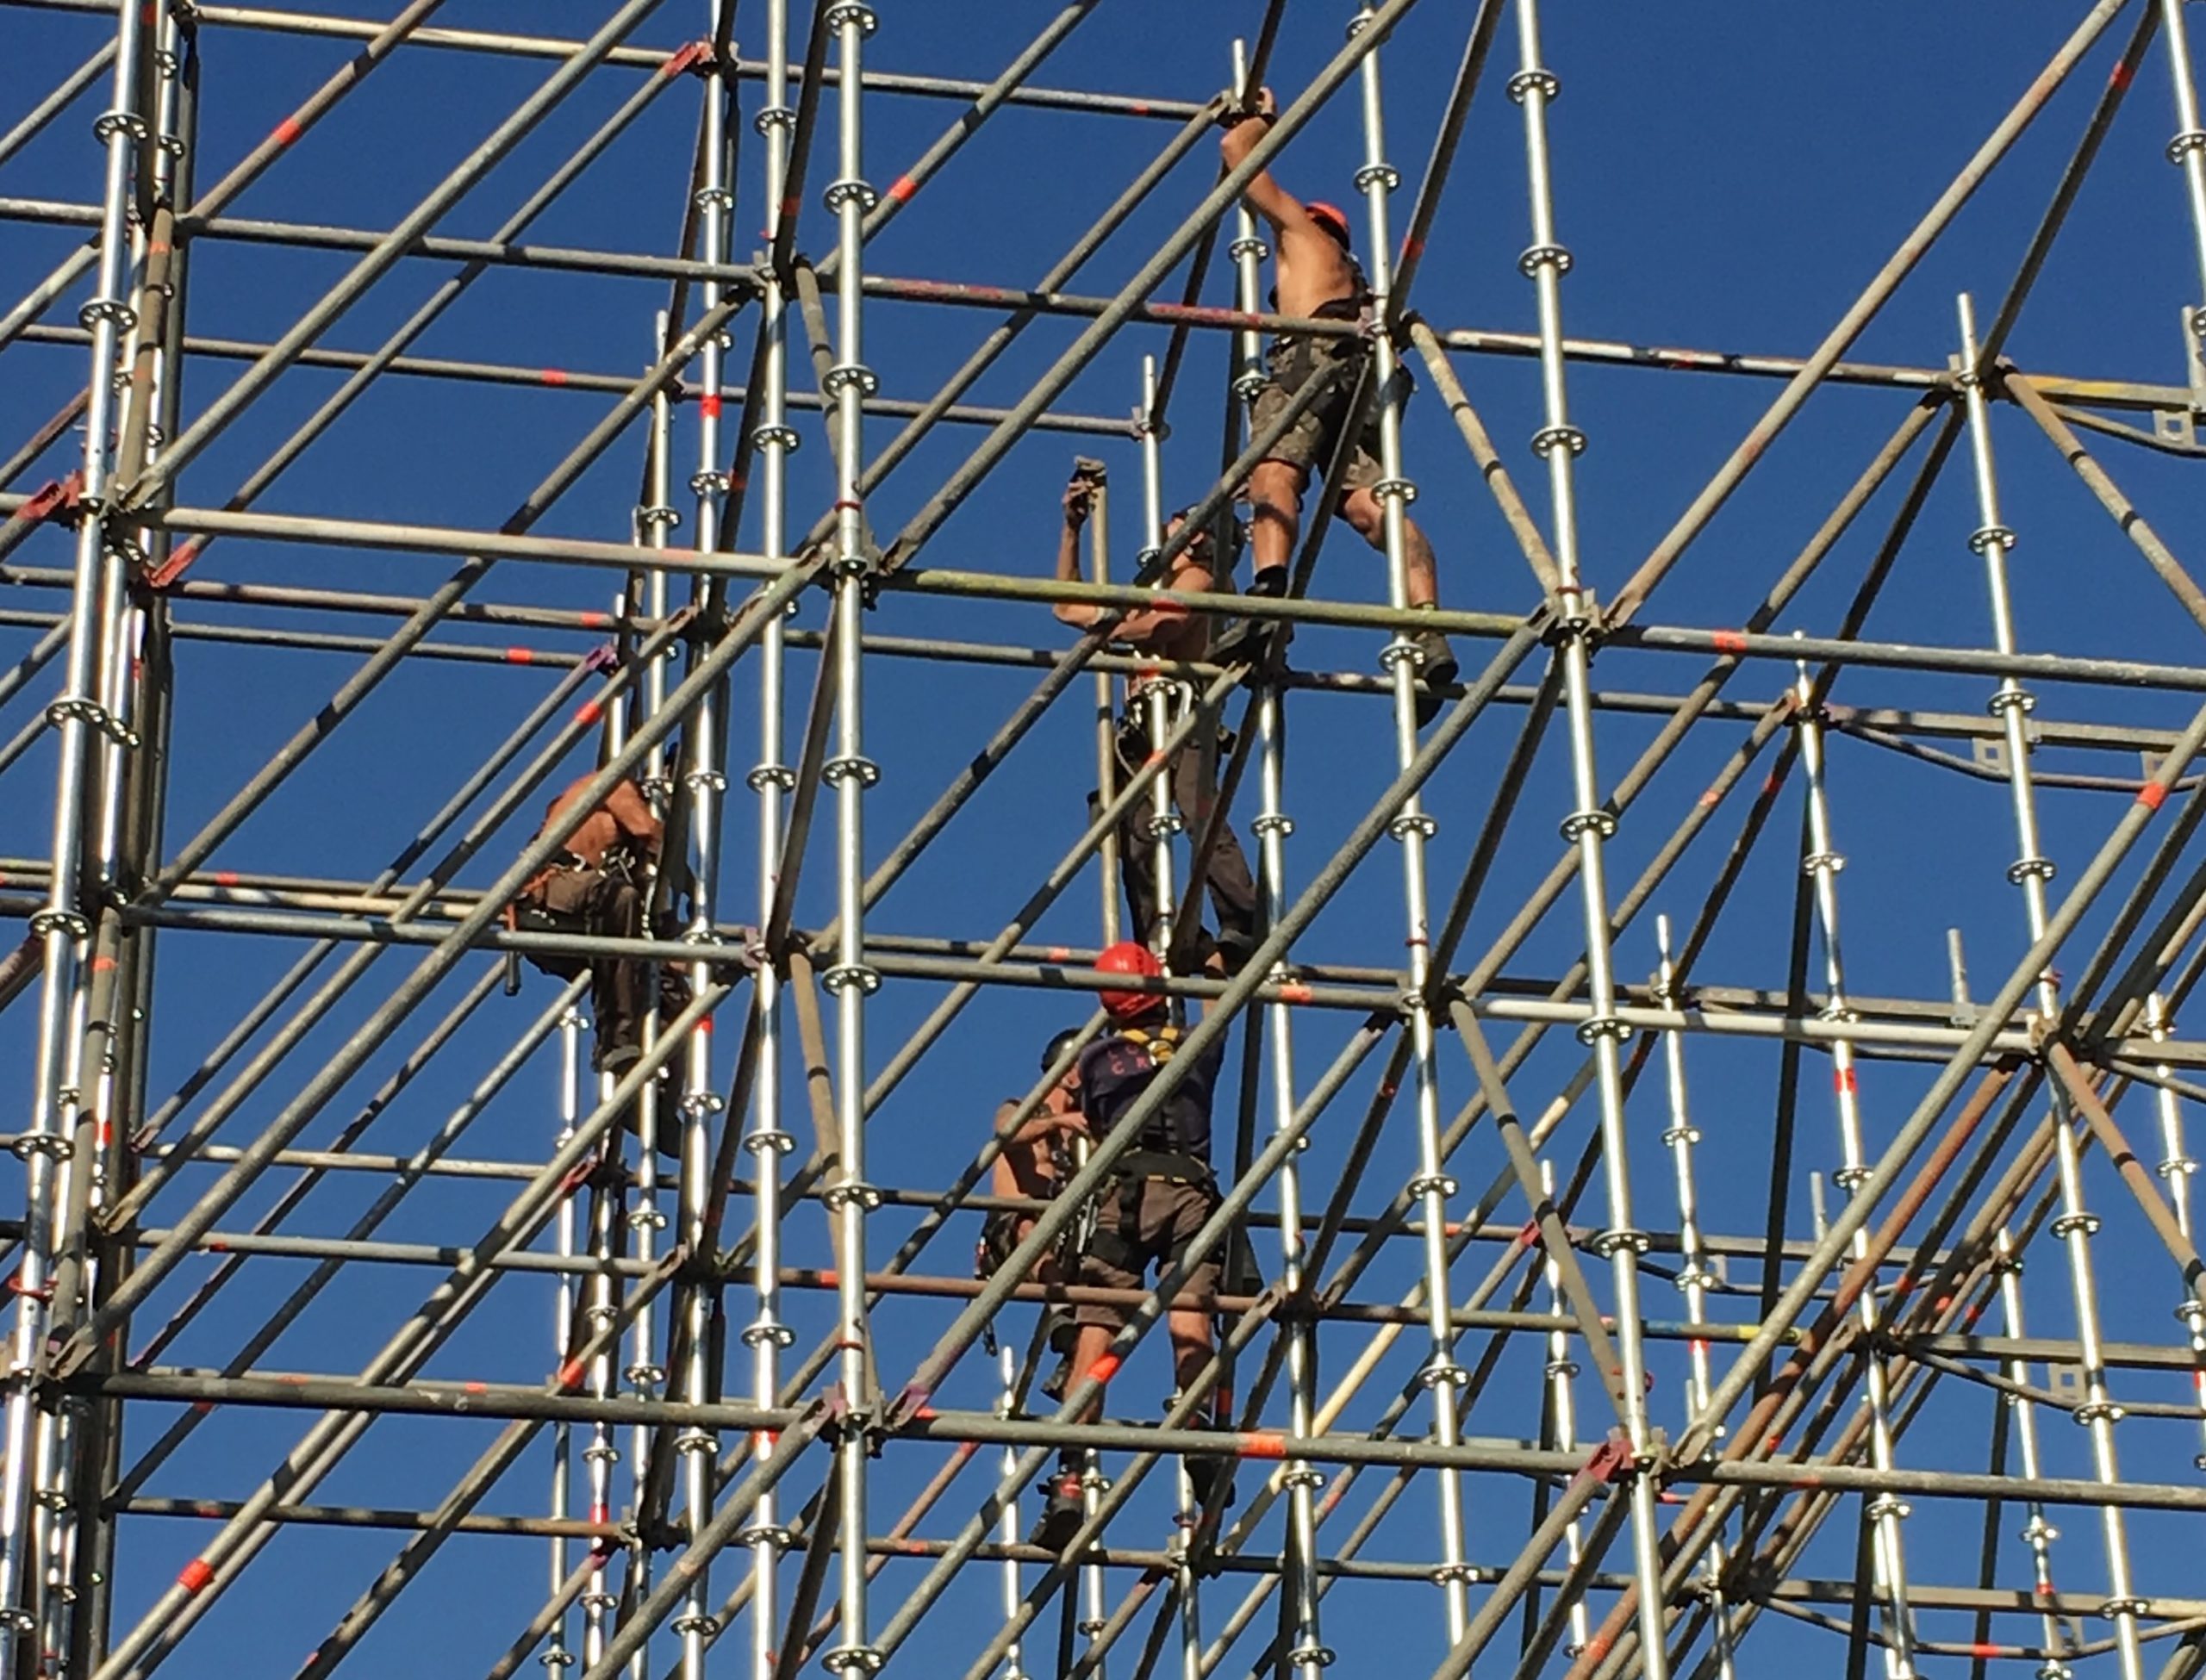 Workers on building scaffolding.